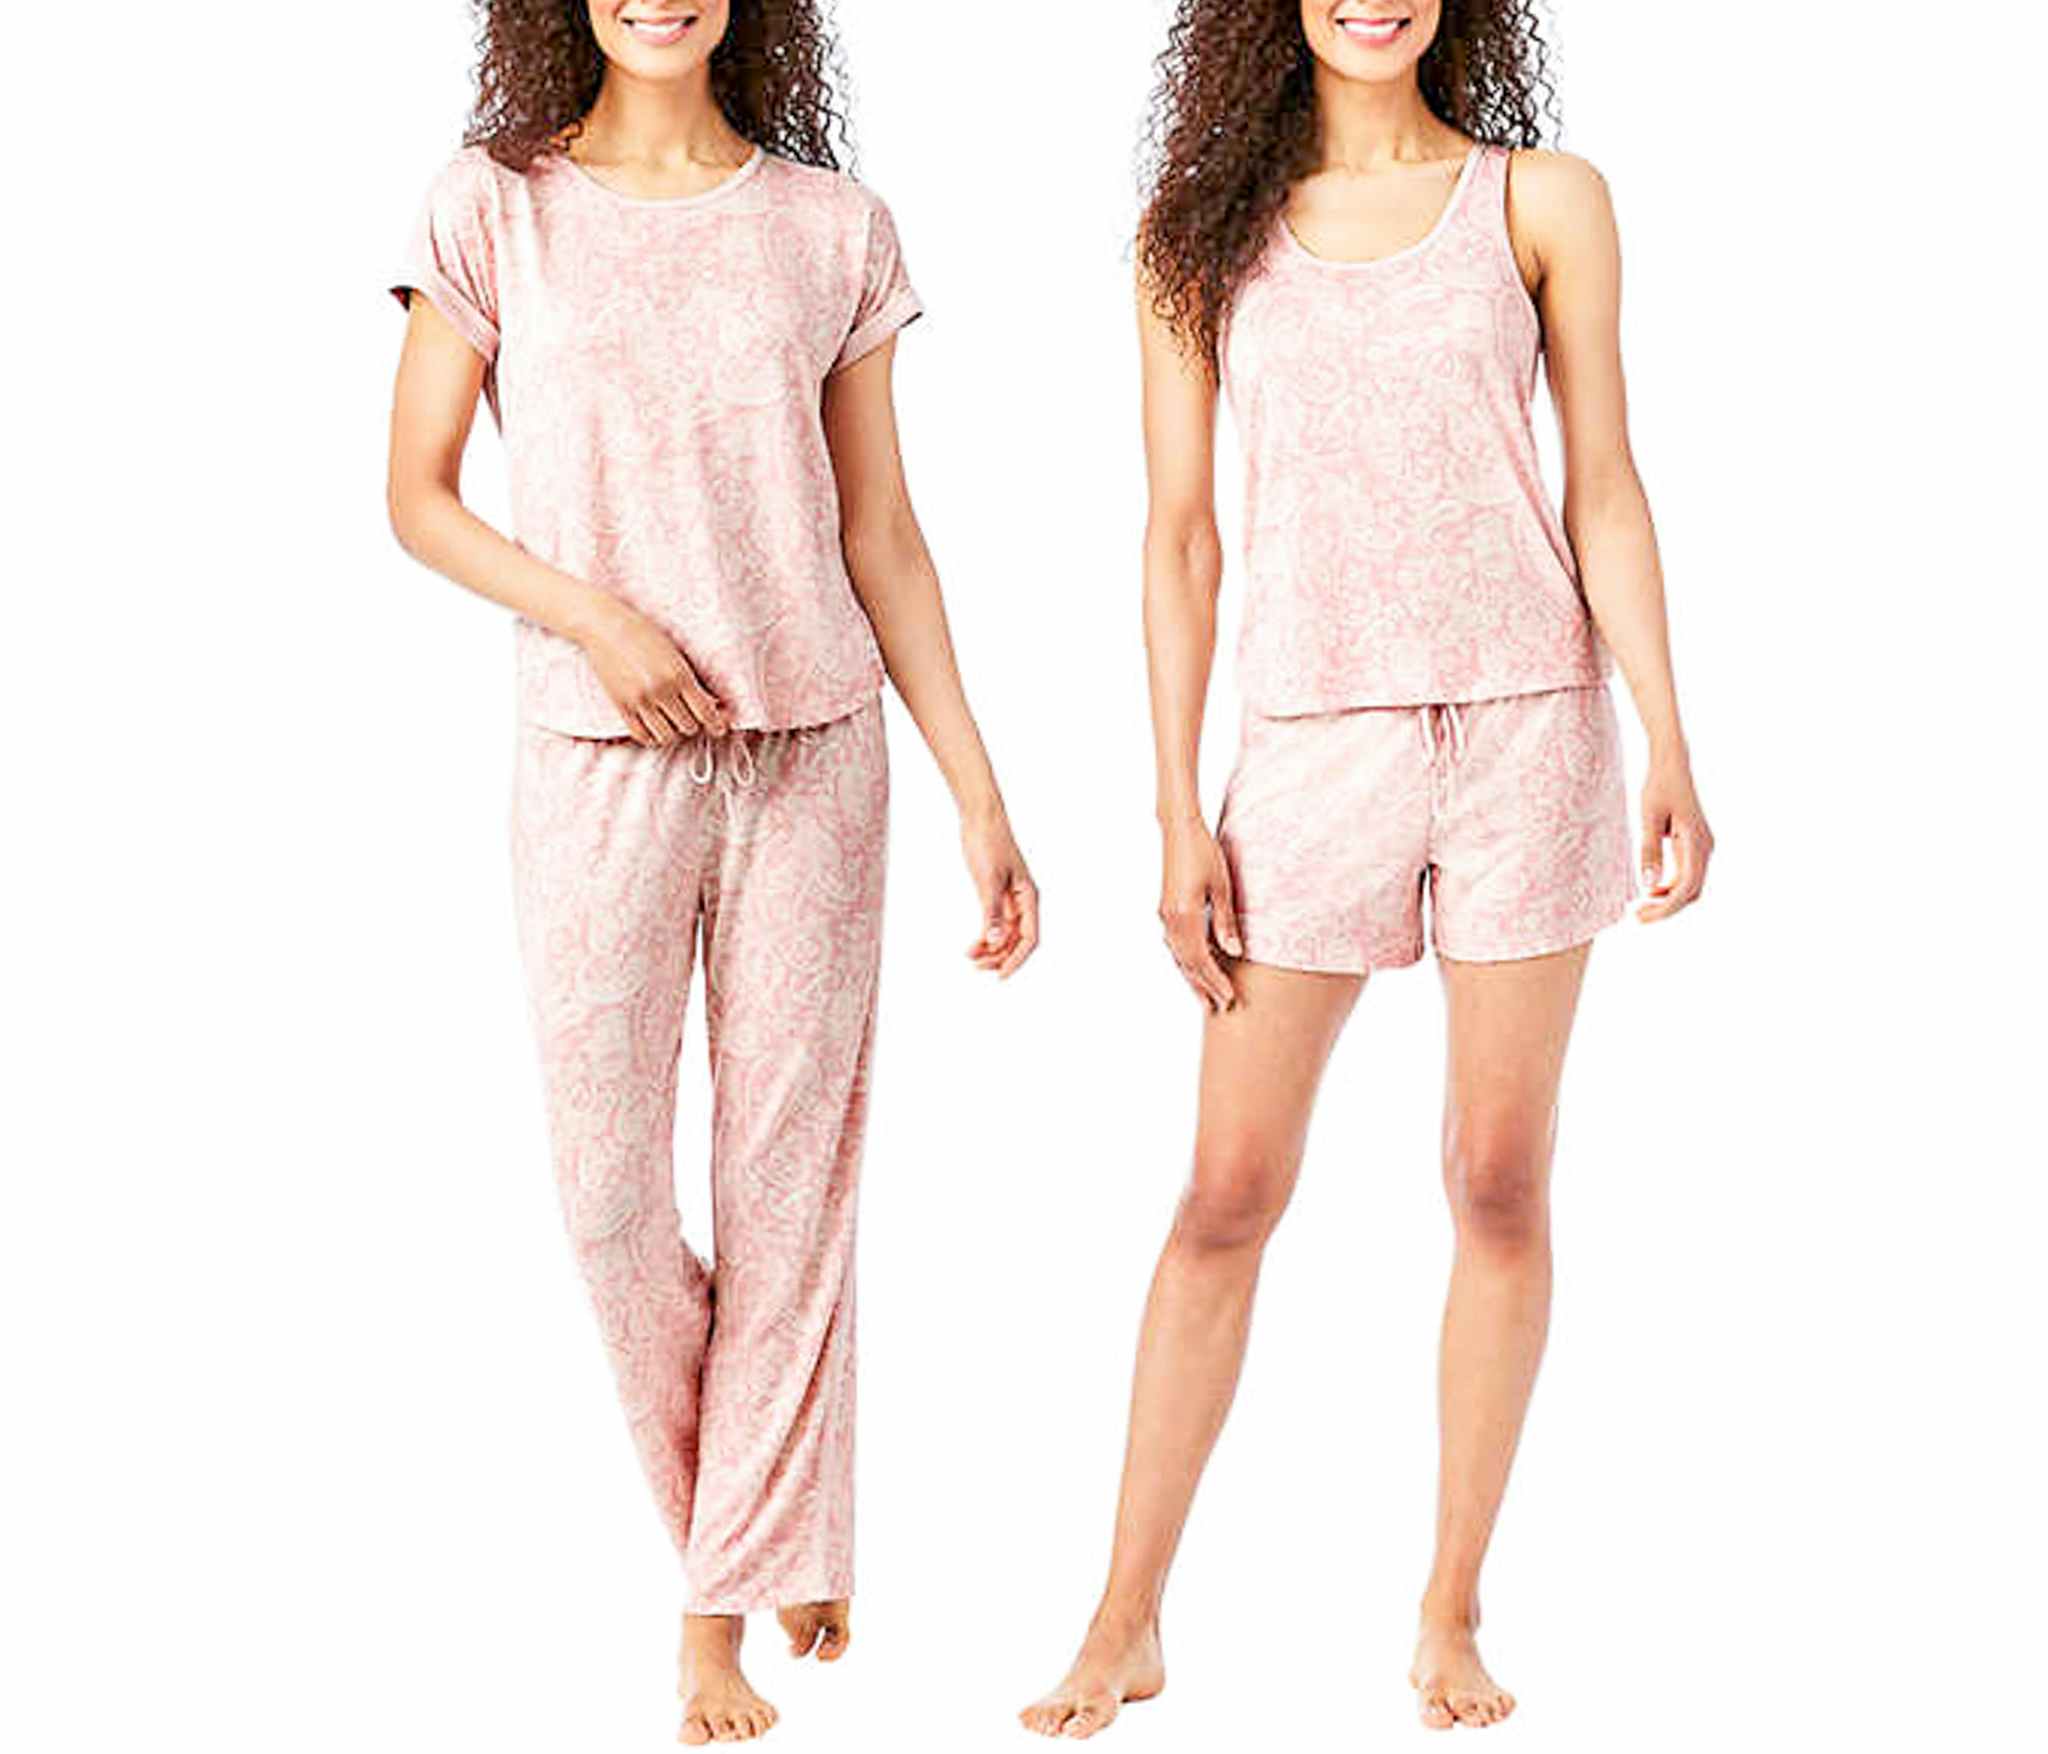 stock photo of a woman modeling two sets of pajamas 